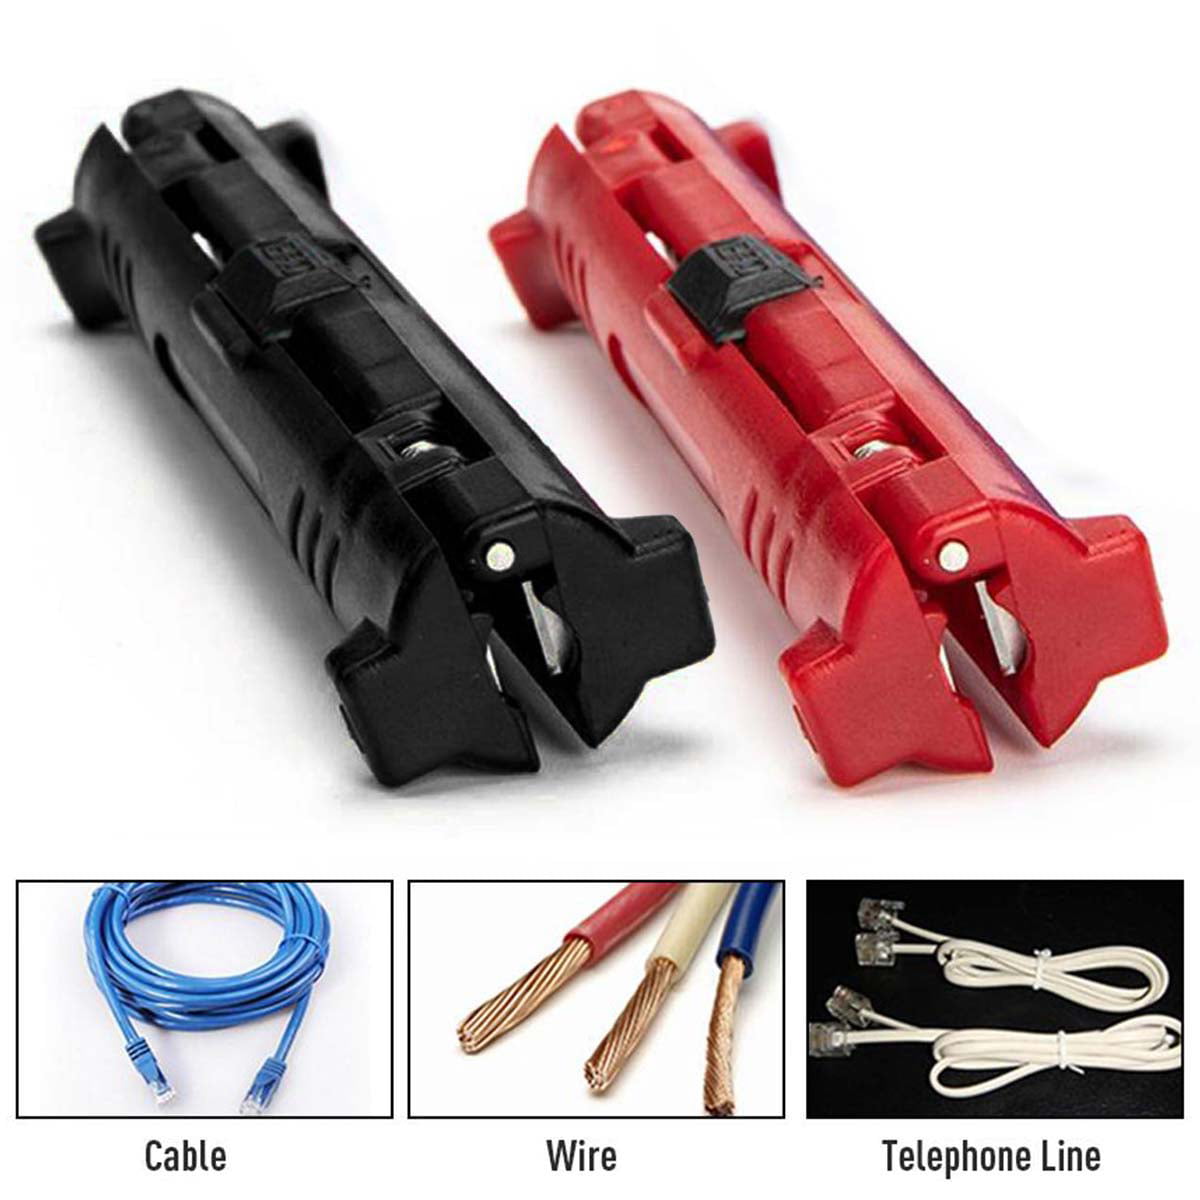 Lighter Weight And Protable Round Cable Jacket Slitter Cable Stripper Cutter Recycling Tool